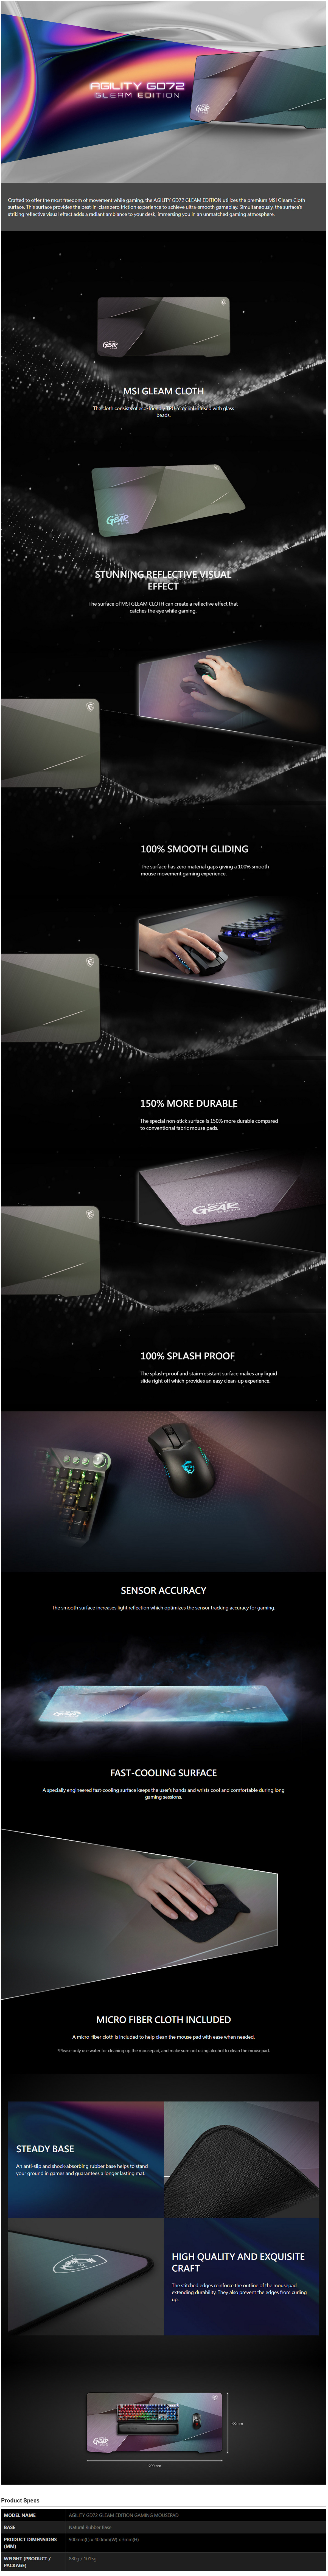 A large marketing image providing additional information about the product MSI Agility GD72 Gleam Edition Mousemat - Additional alt info not provided